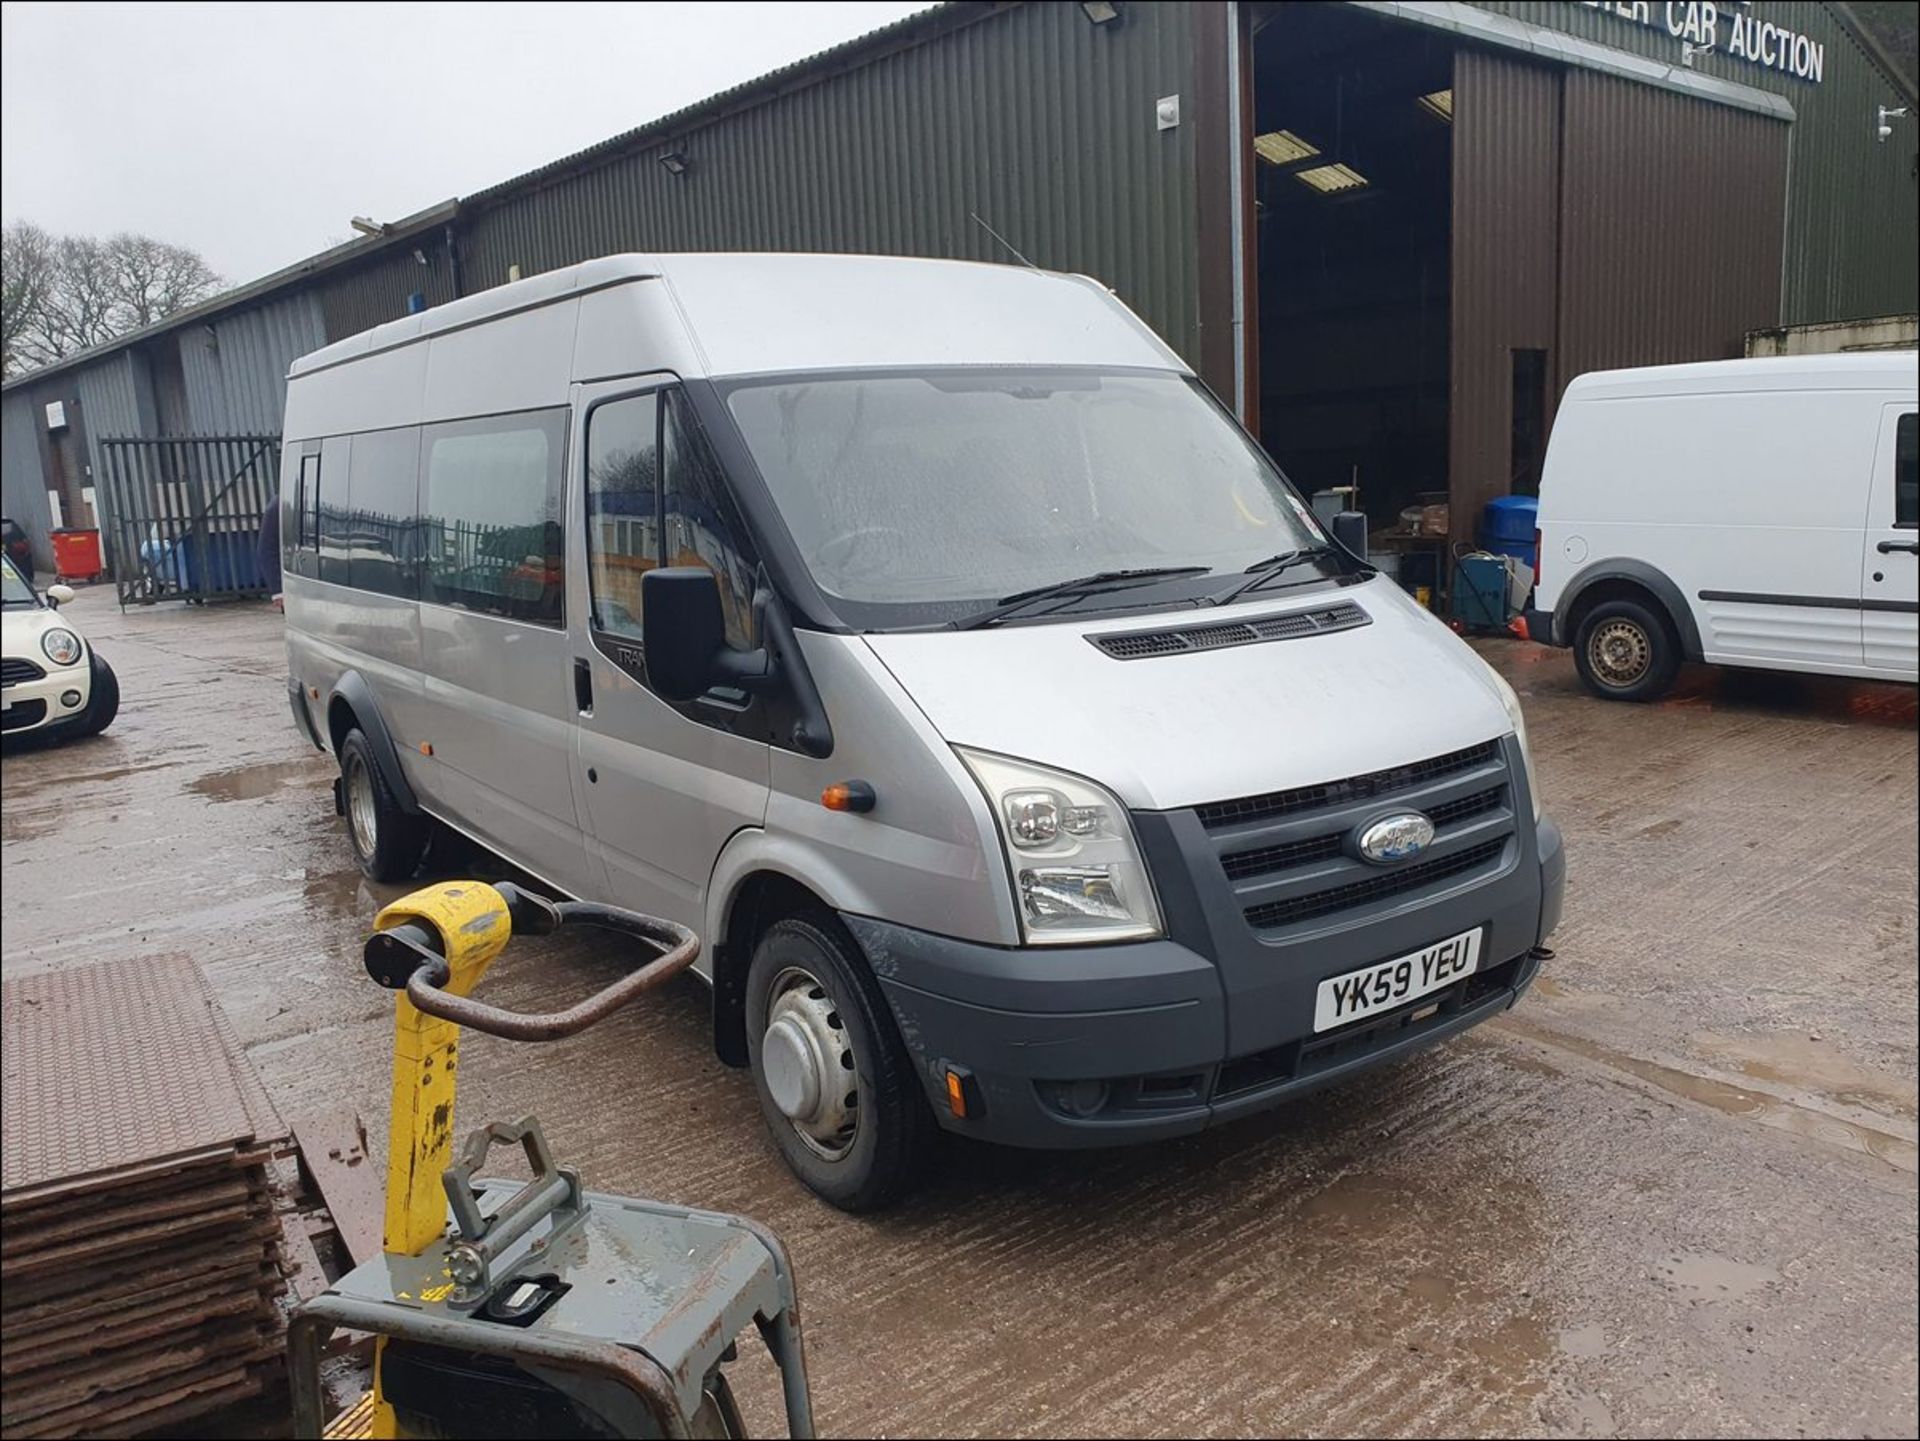 09/59 FORD TRANSIT 115 T430 17S RWD - 2402cc 5dr Minibus (Silver, 177k) - Image 5 of 11